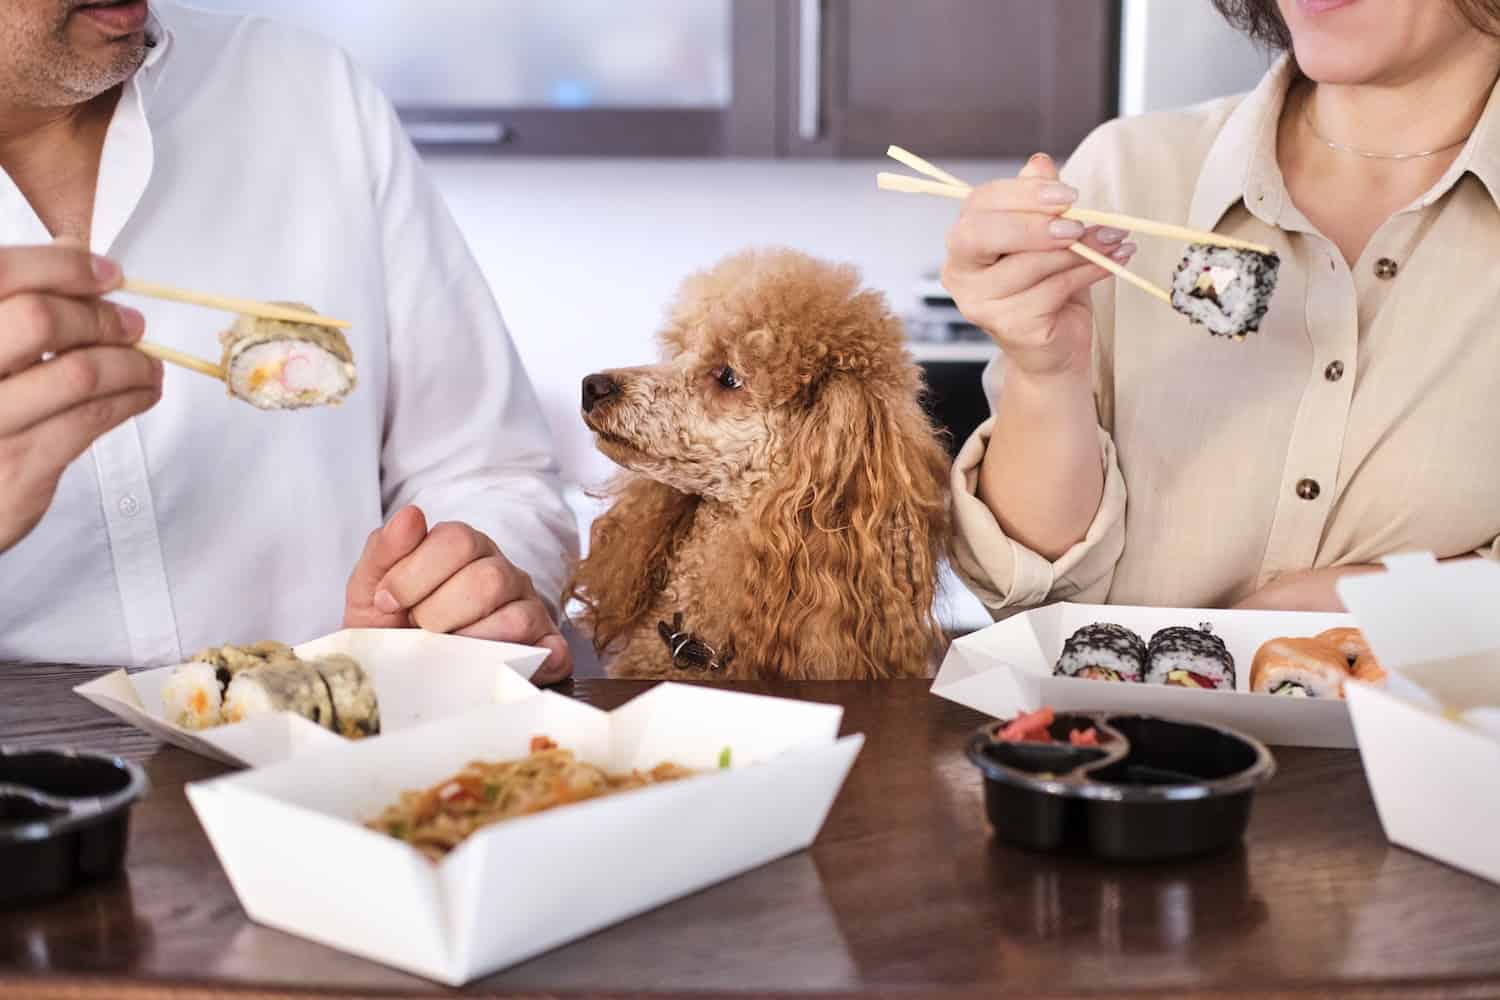 Couple eats takeout with poodle in between them